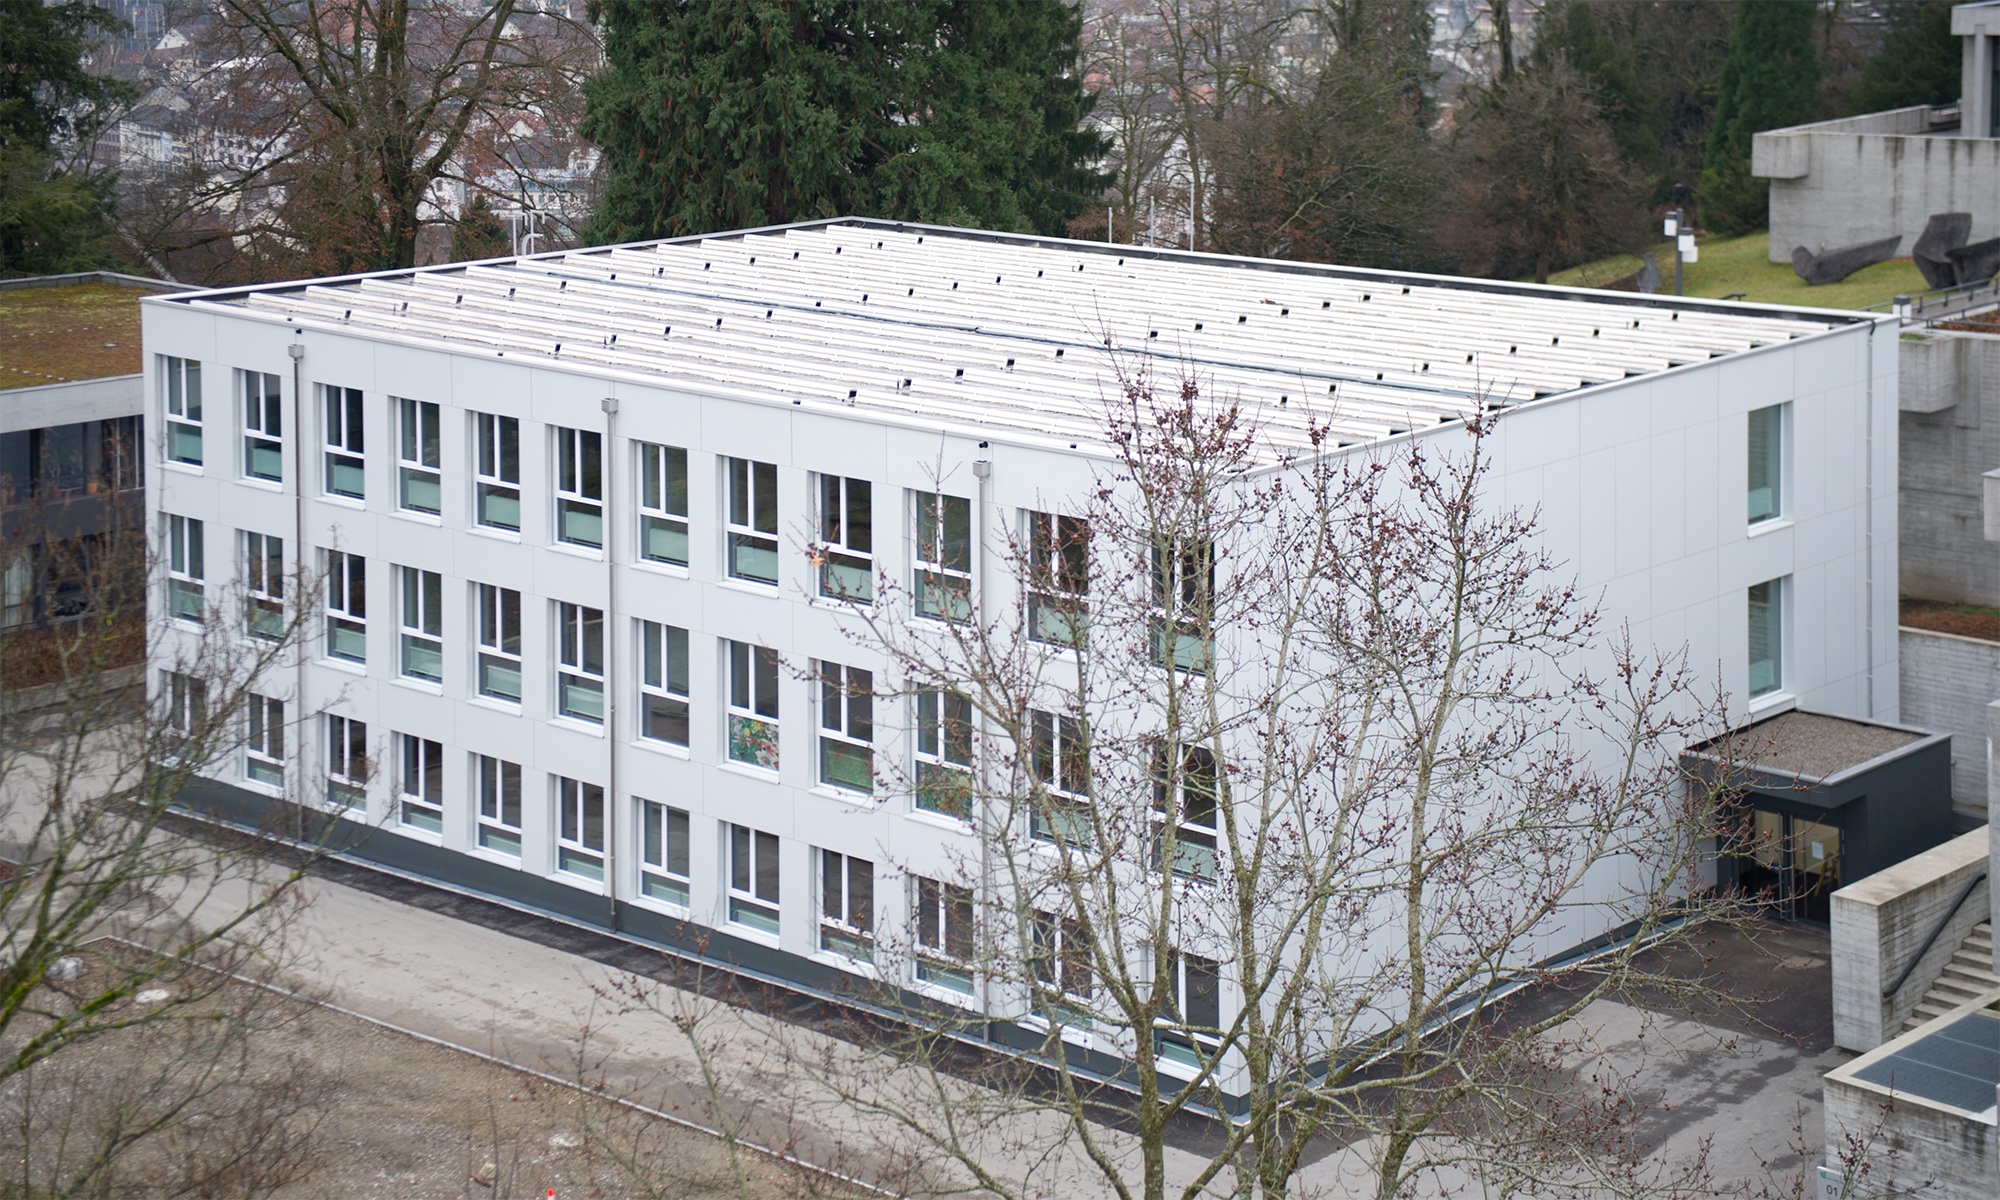 The prefabricated temporary building provided the University of St. Gallen with ample seminar and group rooms during the conversion.